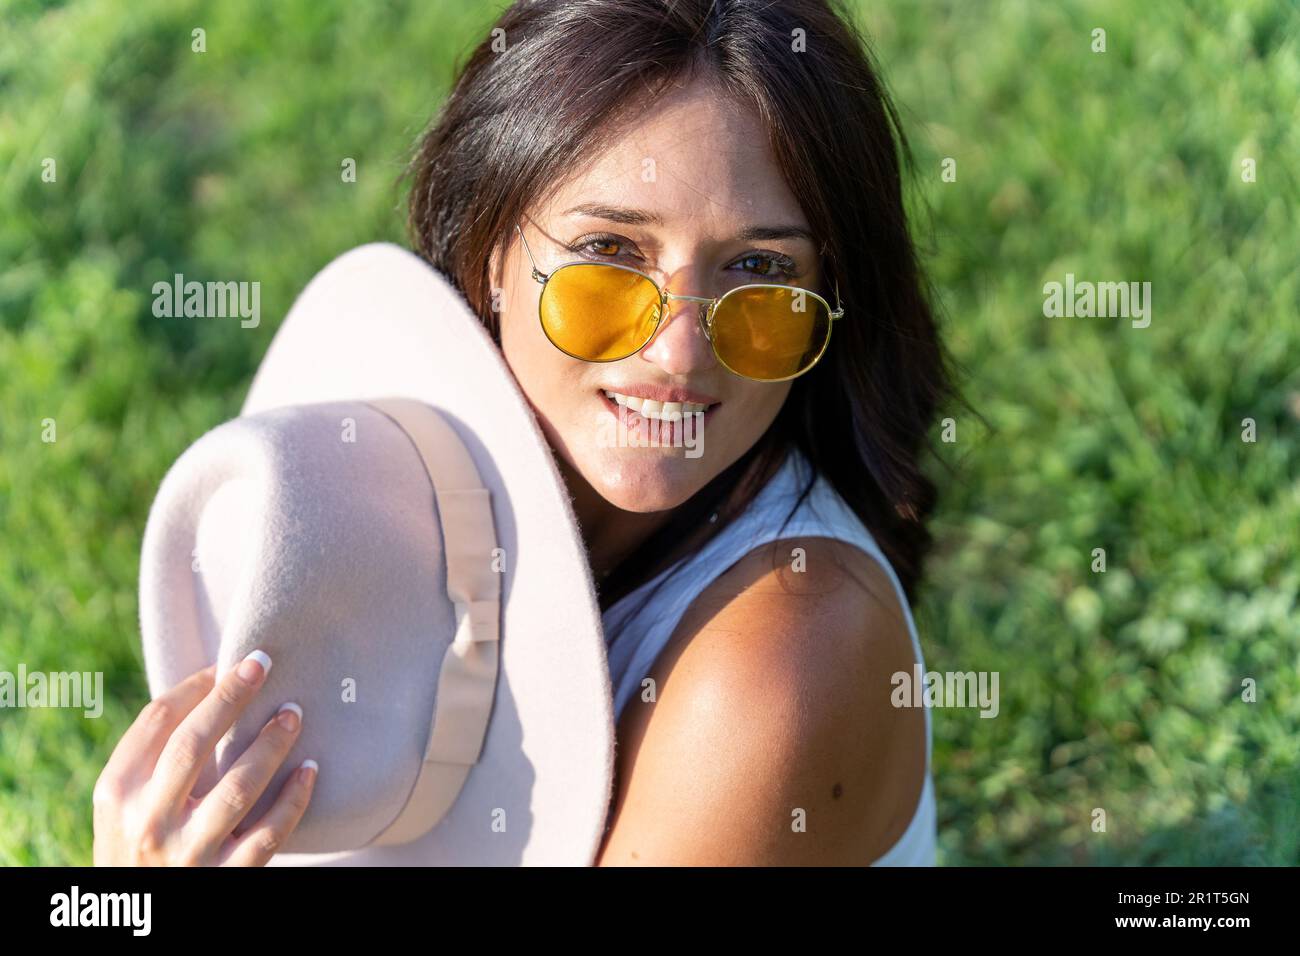 Close-up view of a woman in sunglasses looking at camera and smiling while sitting outdoors on the grass on a sunny day. Stock Photo